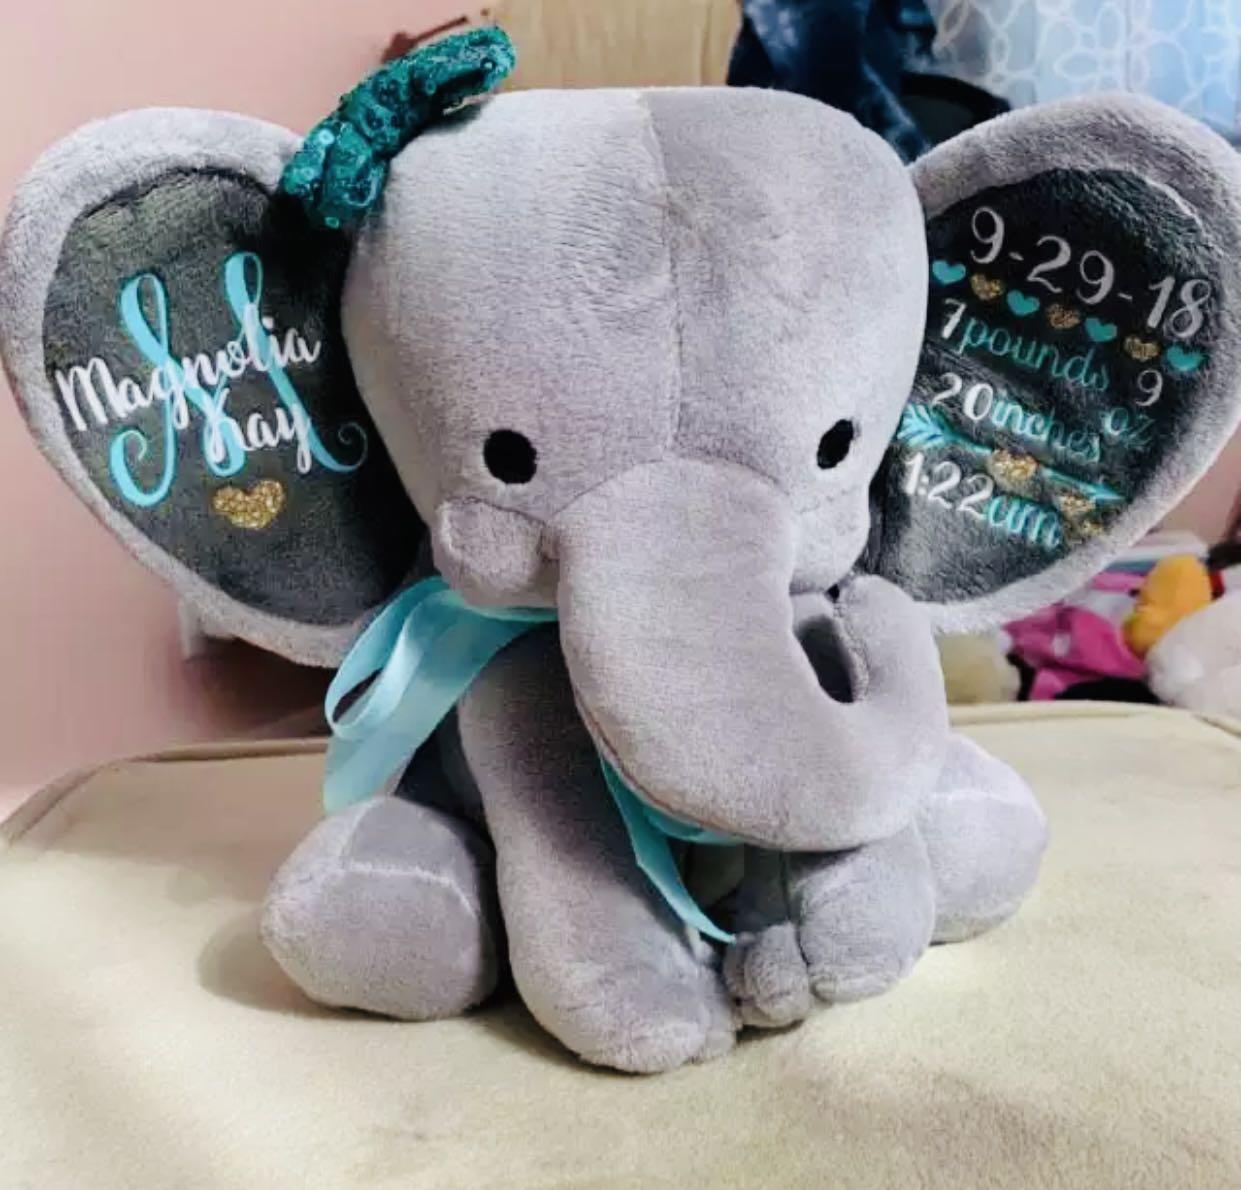 personalized baby gift Birth Stat Elephant Birth Stats Stuffed Animal Personalized Elephant Stuffed Animal Birth Announcement Elephant Birth Stat Elephant Birth stat stuffed animal